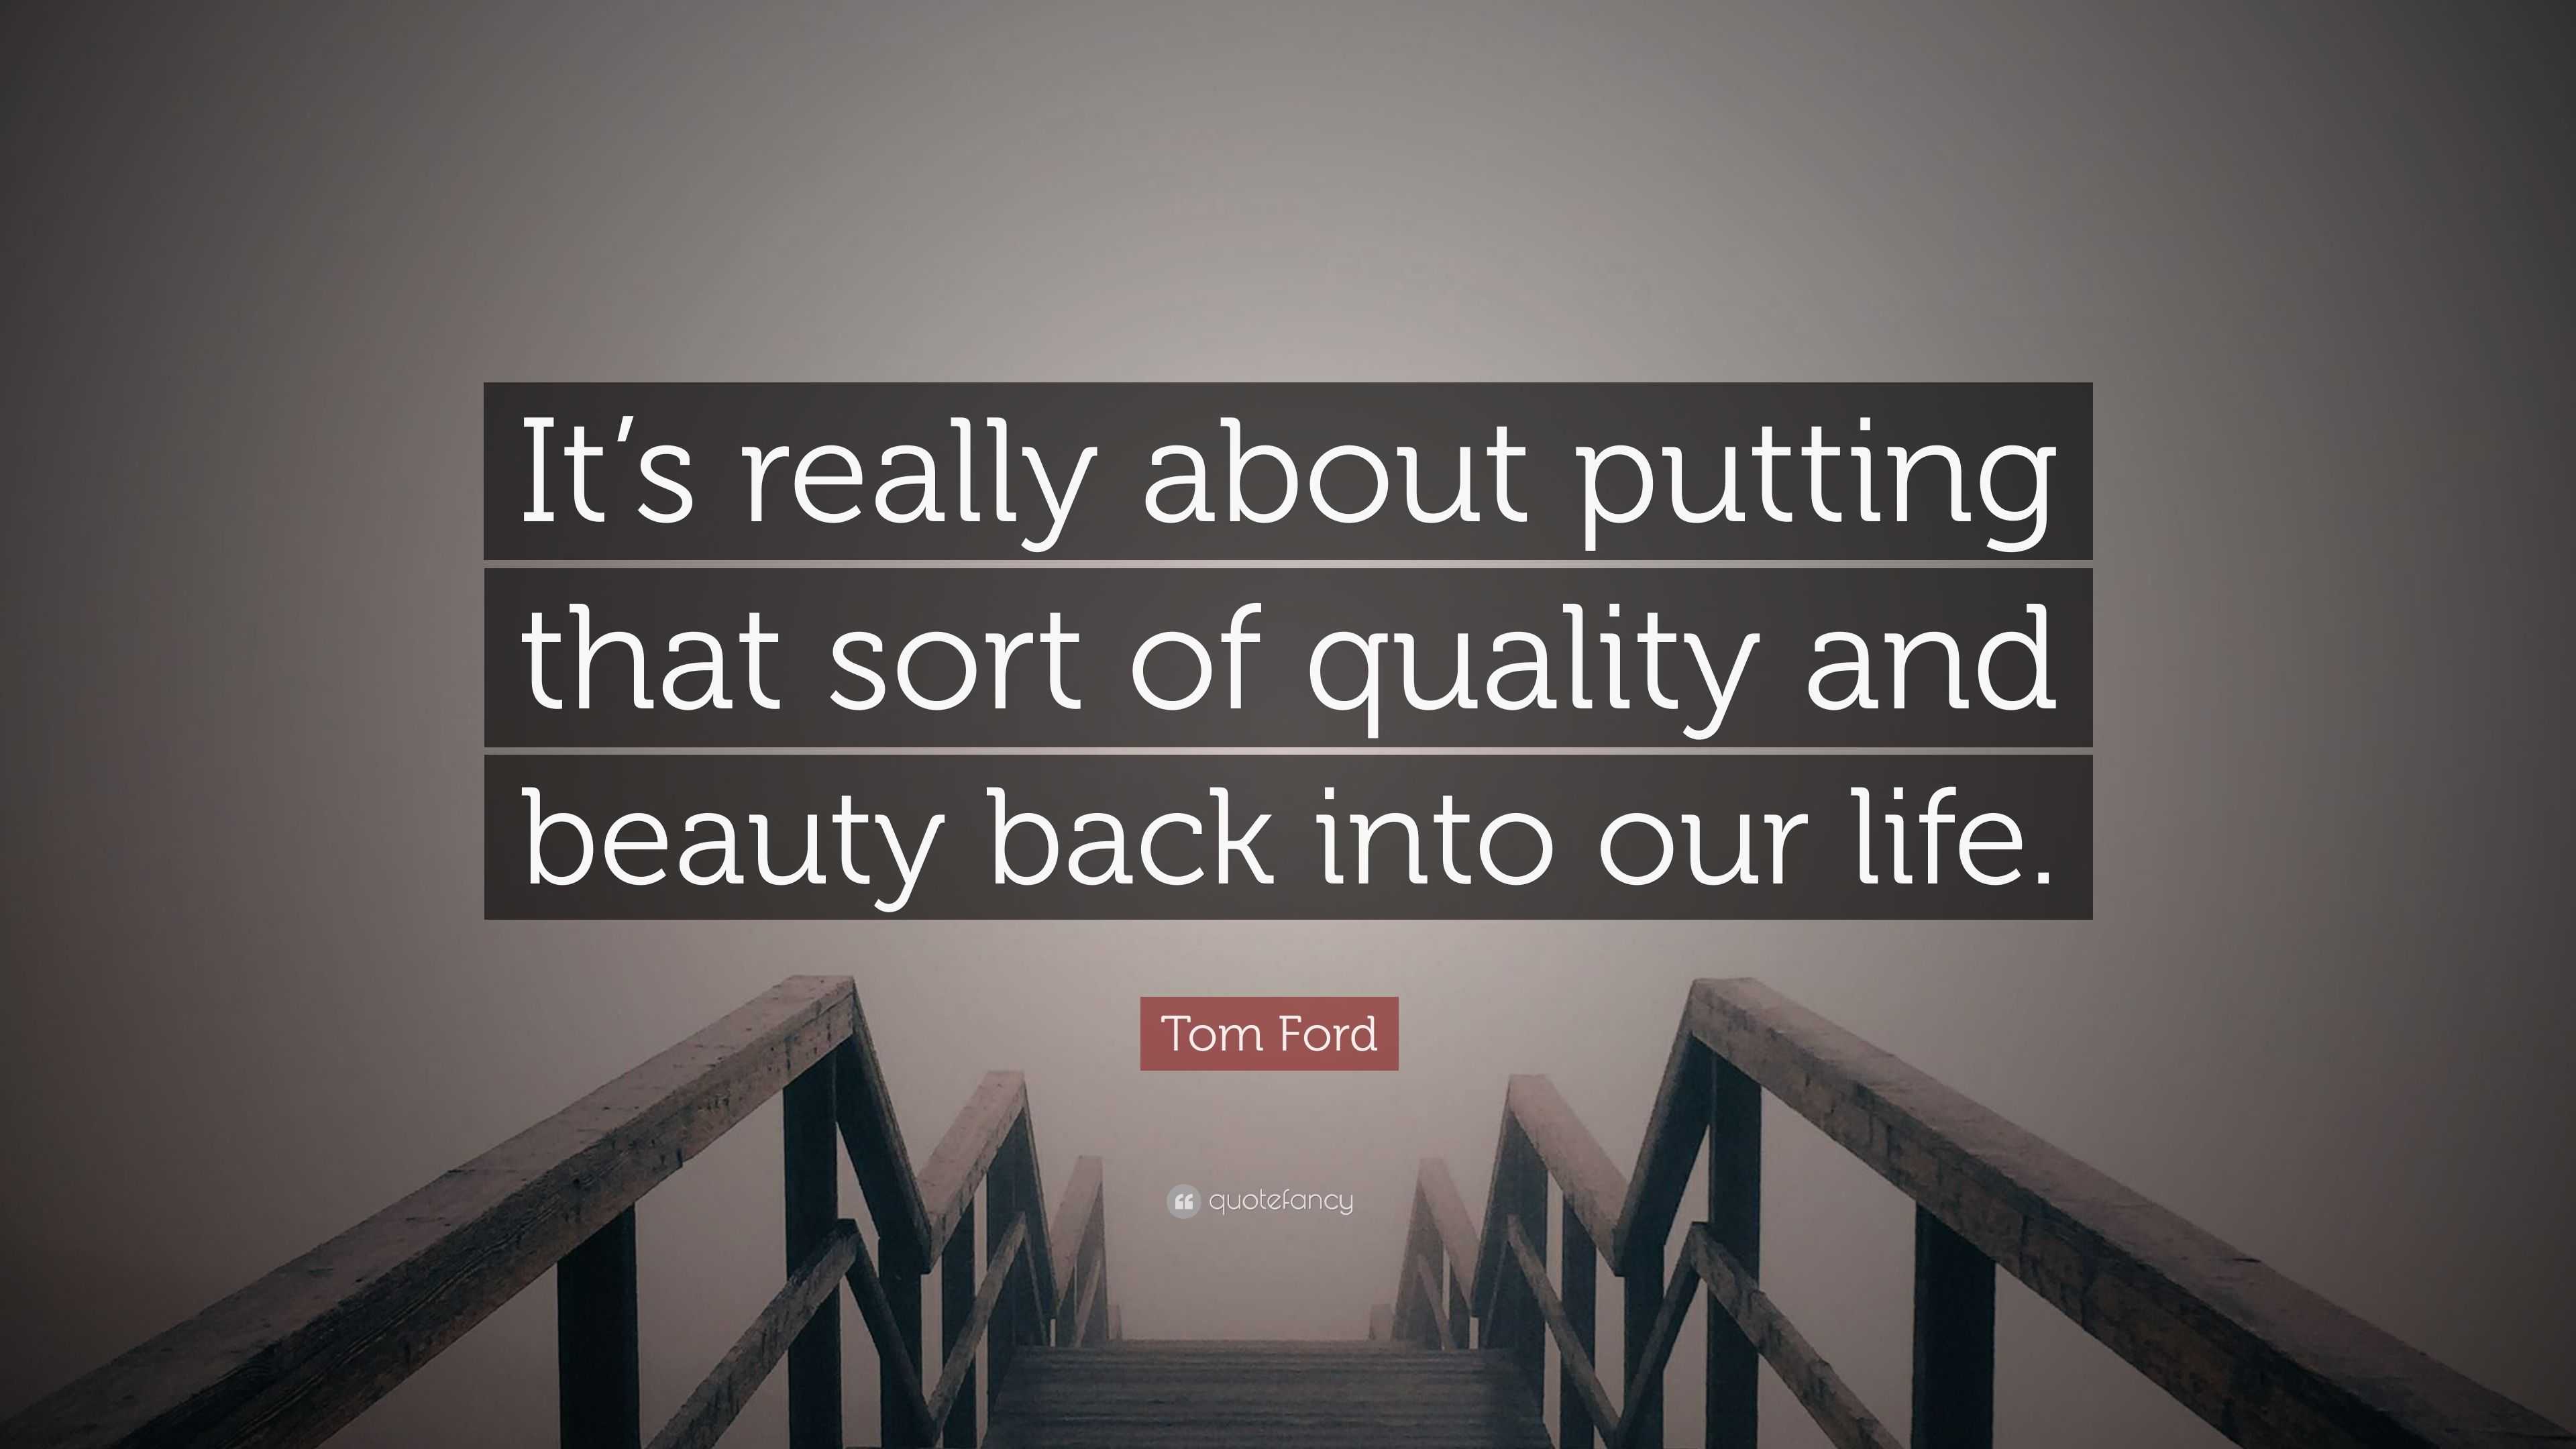 Tom Ford Quote: “It's really about putting that sort of and beauty back into